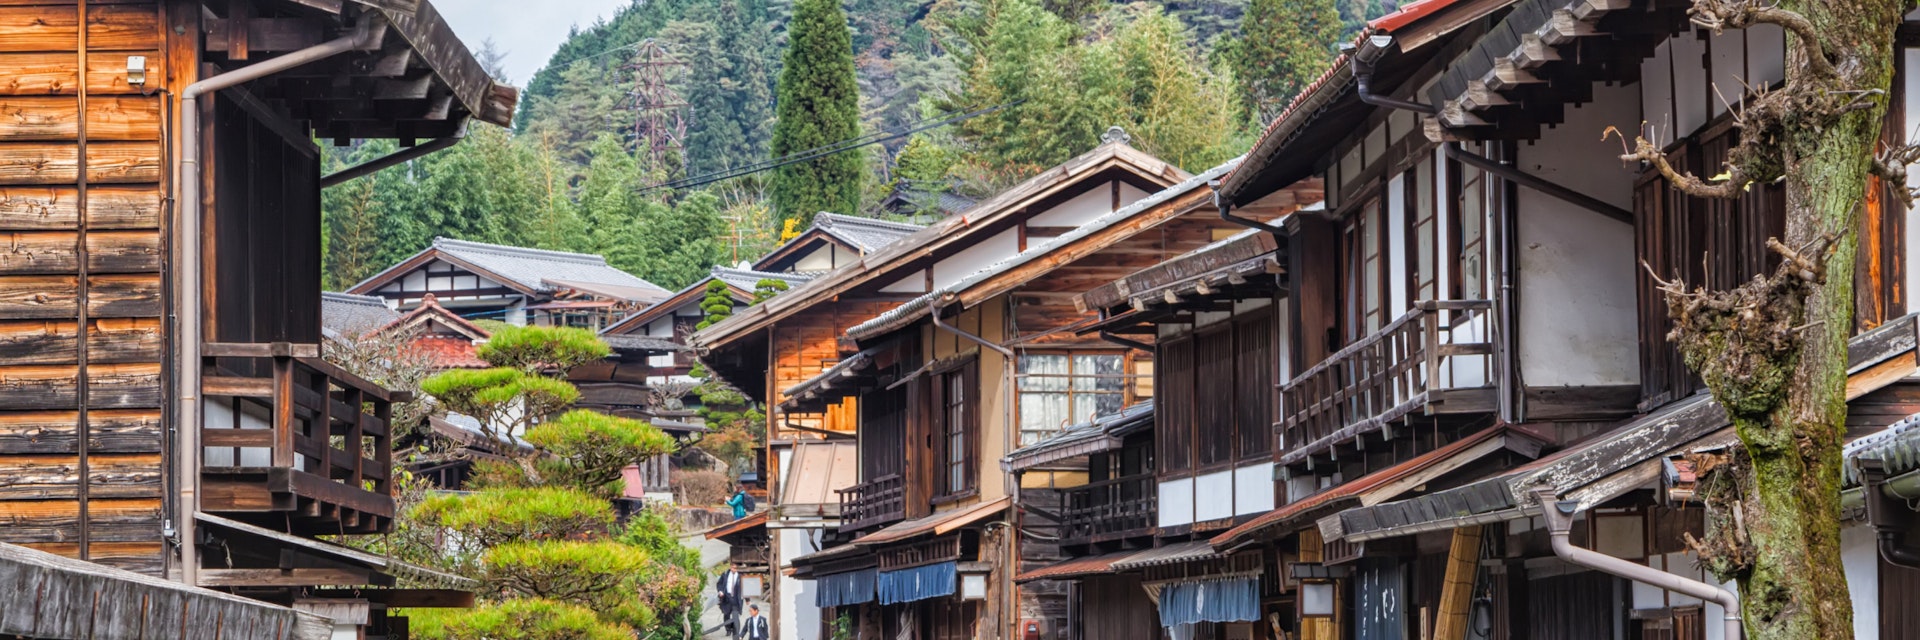 TSUMAGO, JAPAN - NOVEMBER 19, 2015: Scenic traditional post town in Japan from Edo period. Famous Nakasendo trail goes between Magome and Tsumago towns.